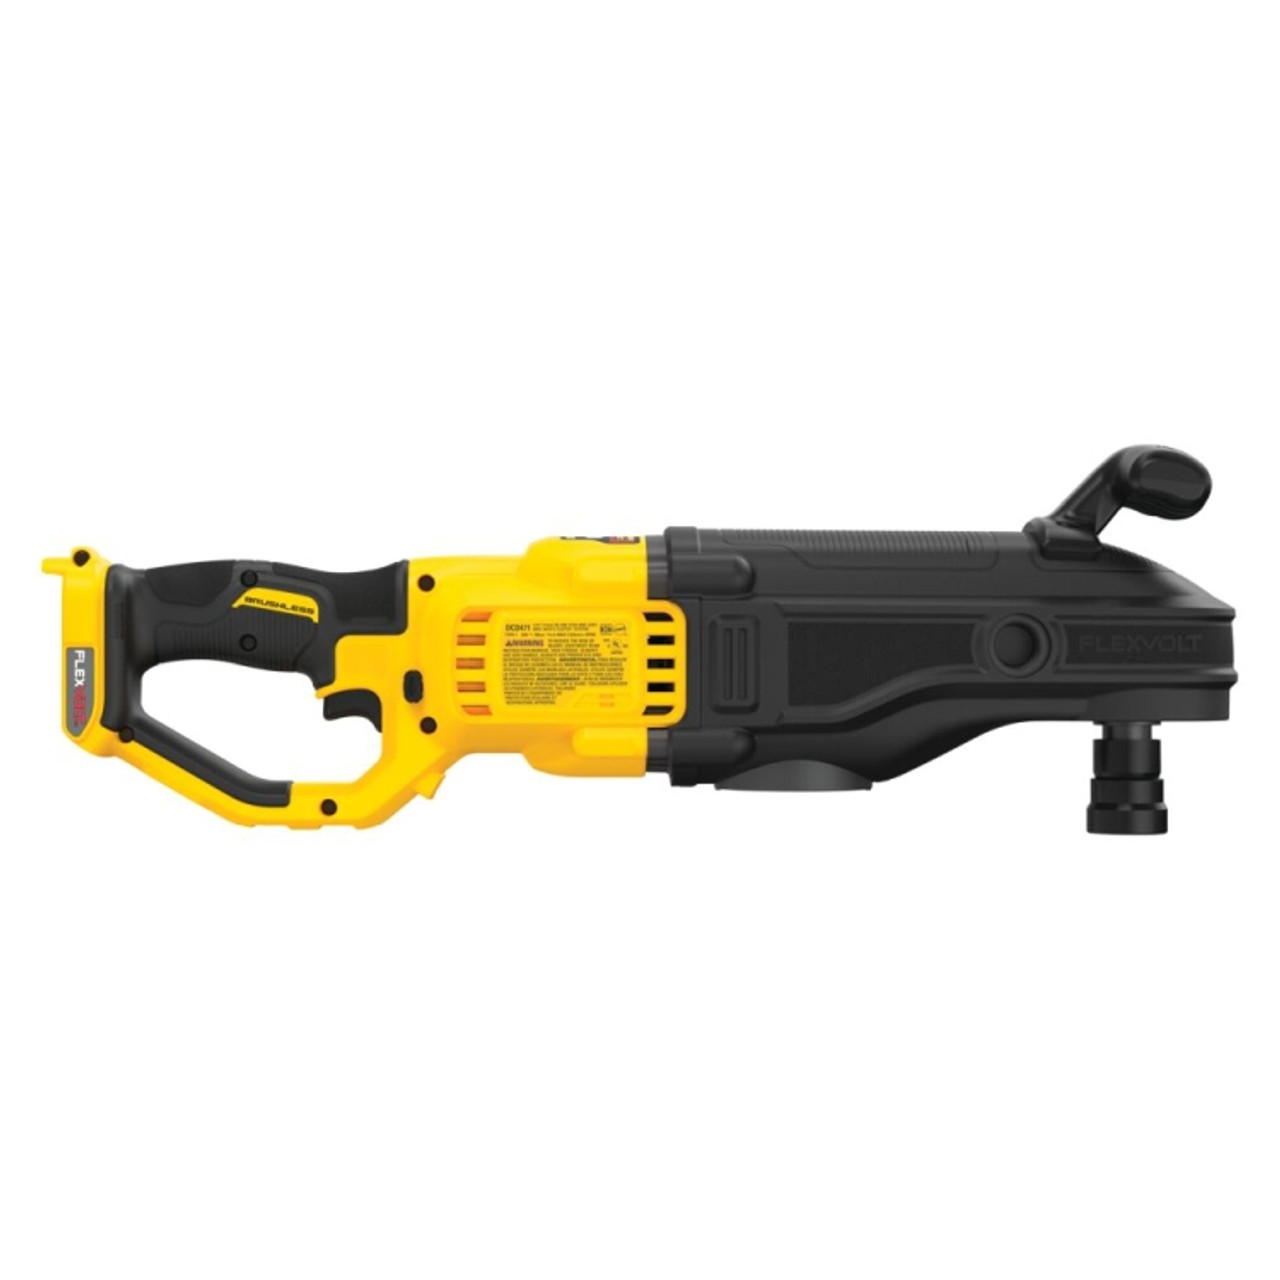 Dewalt DCD471B 60V MAX Brushless Cordless Quick-Change Stud And Joist Drill  With E-Clutch System